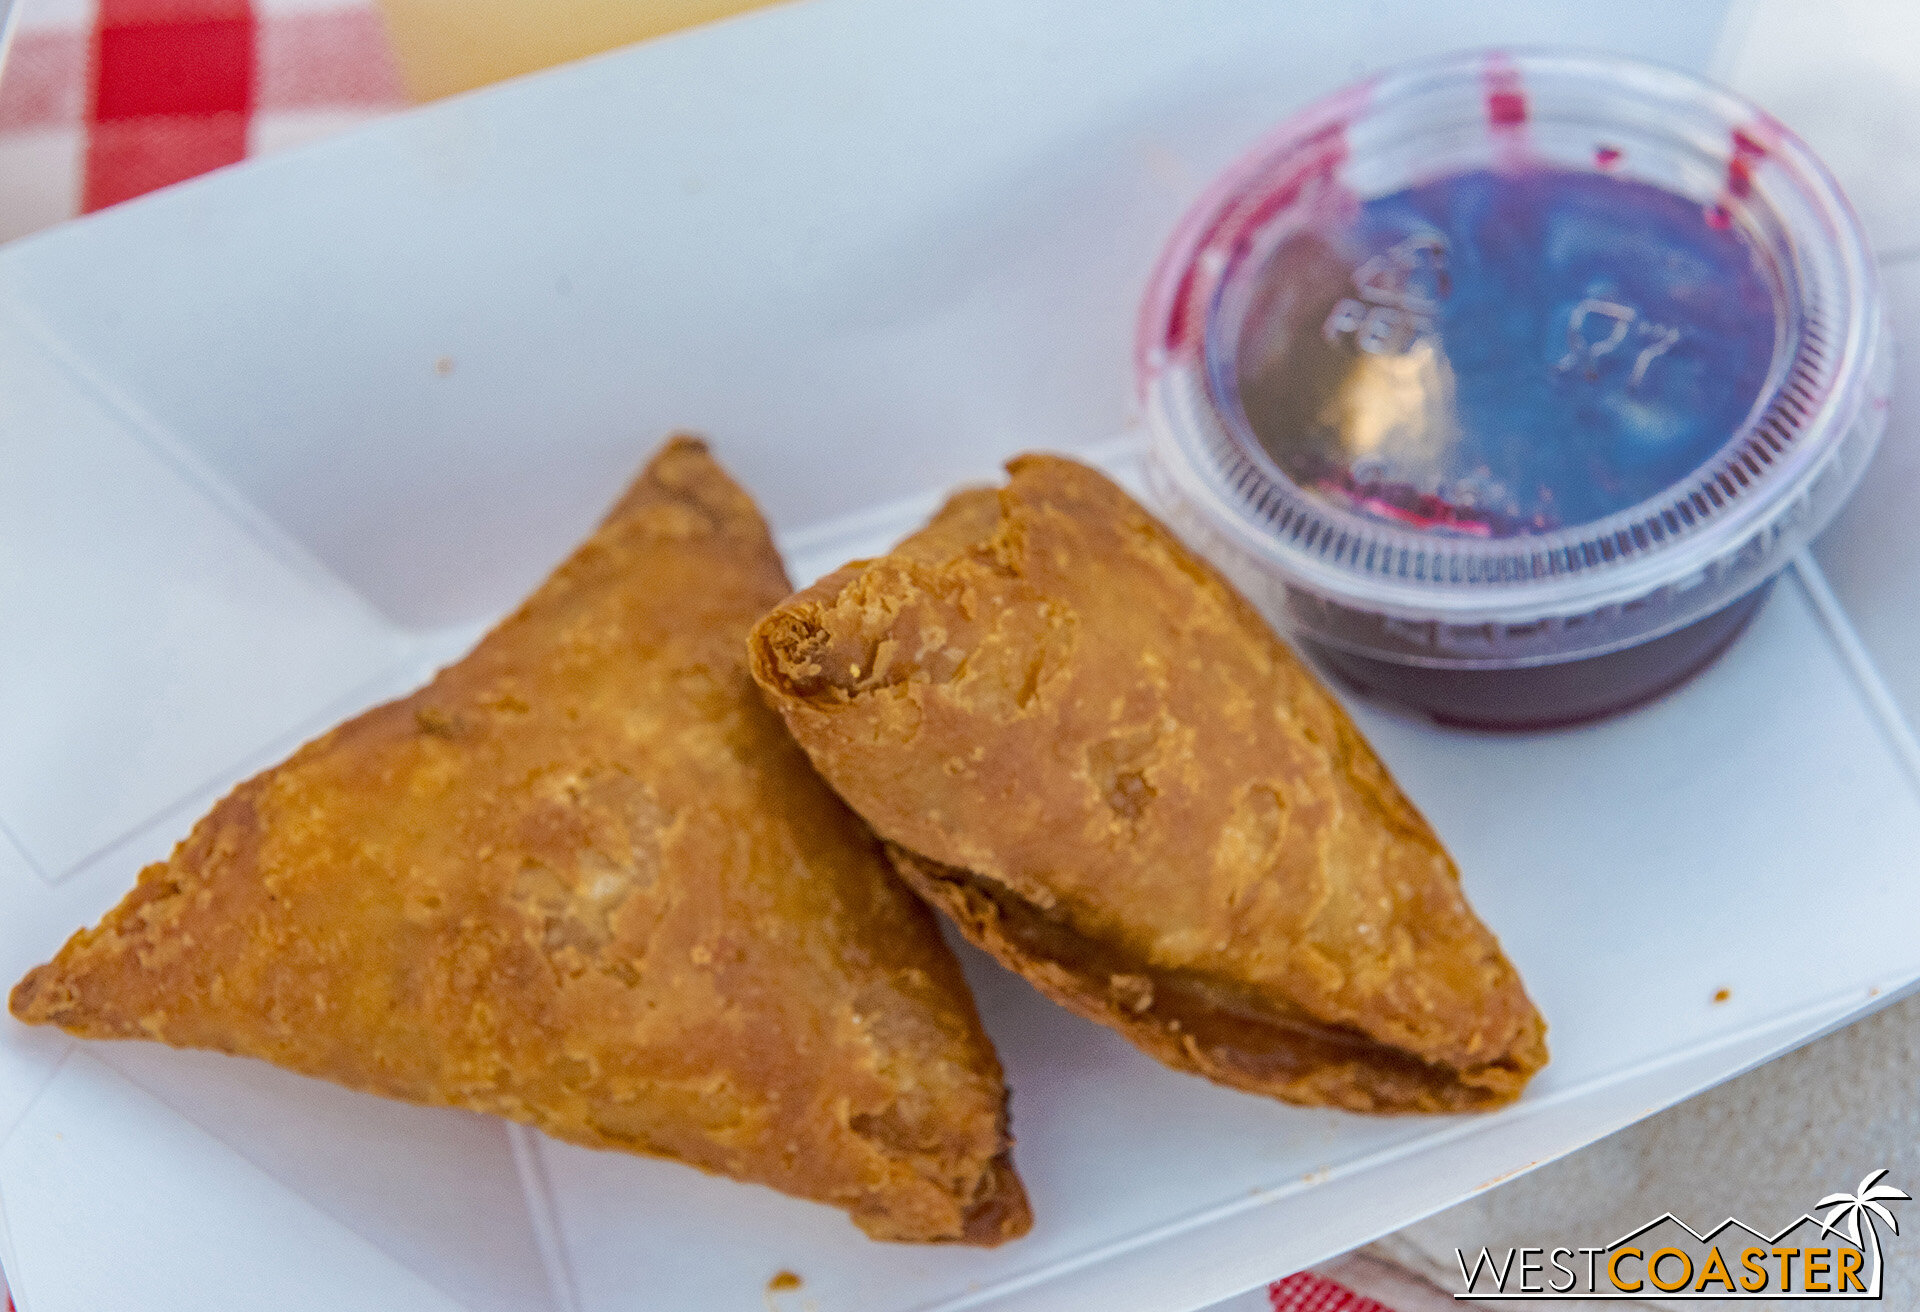  Samosas with Boysenberry Chutney These were also excellent.  Lightly crispy and crunchy, with a nice tart in the chutney.  They were good at the Boysenberry Tasting experience and good here too. 